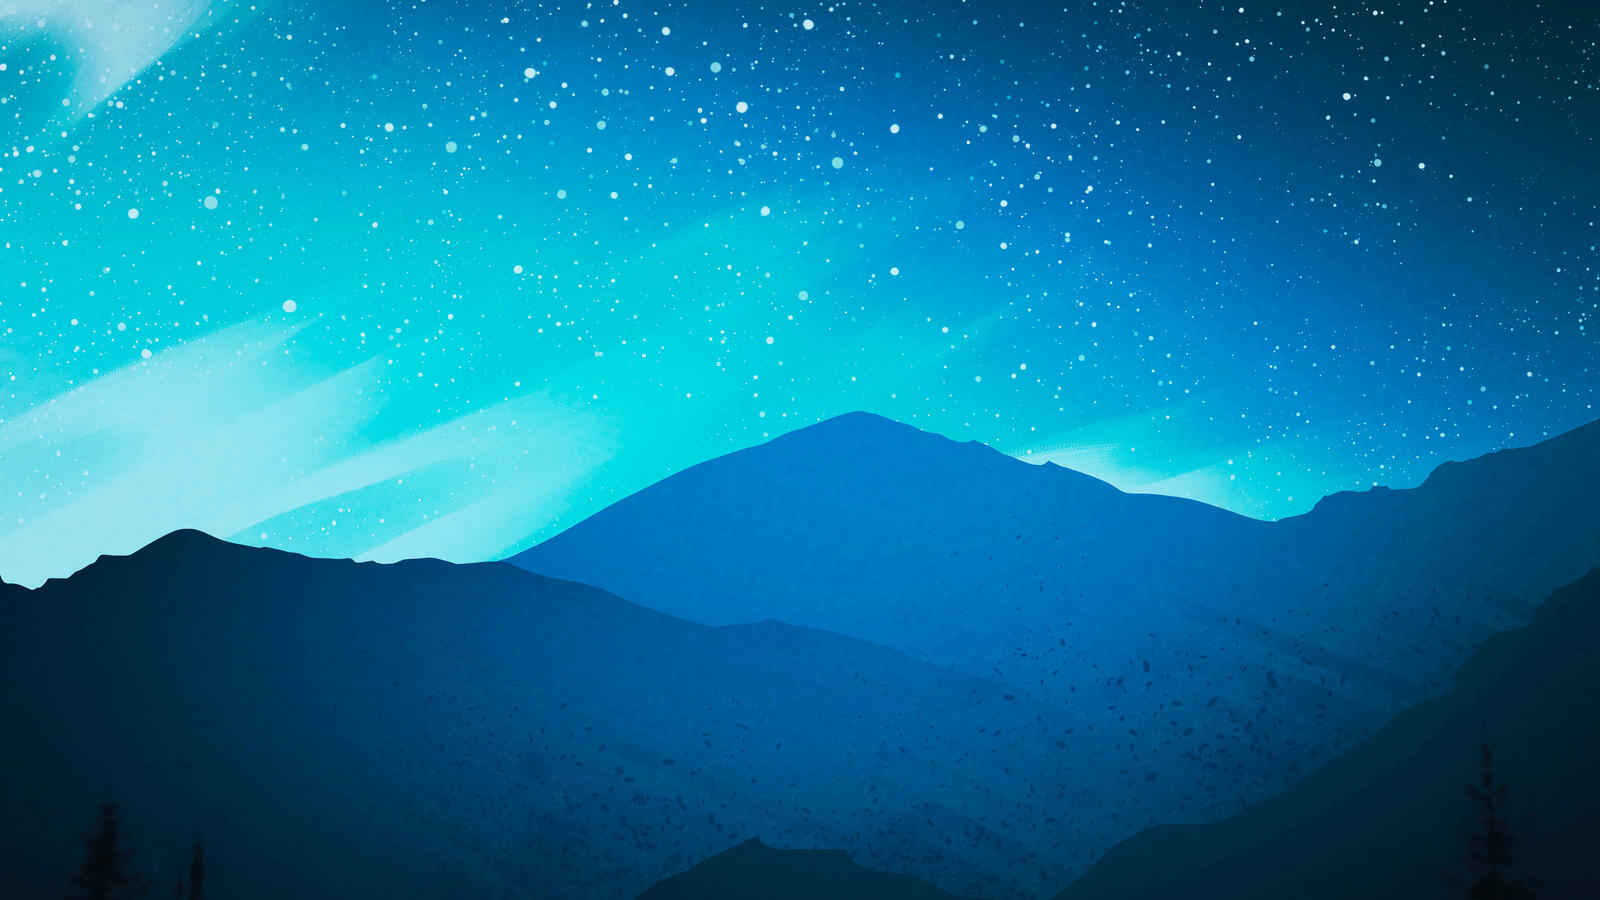 Wallpapers mountains silhouette evening on the desktop